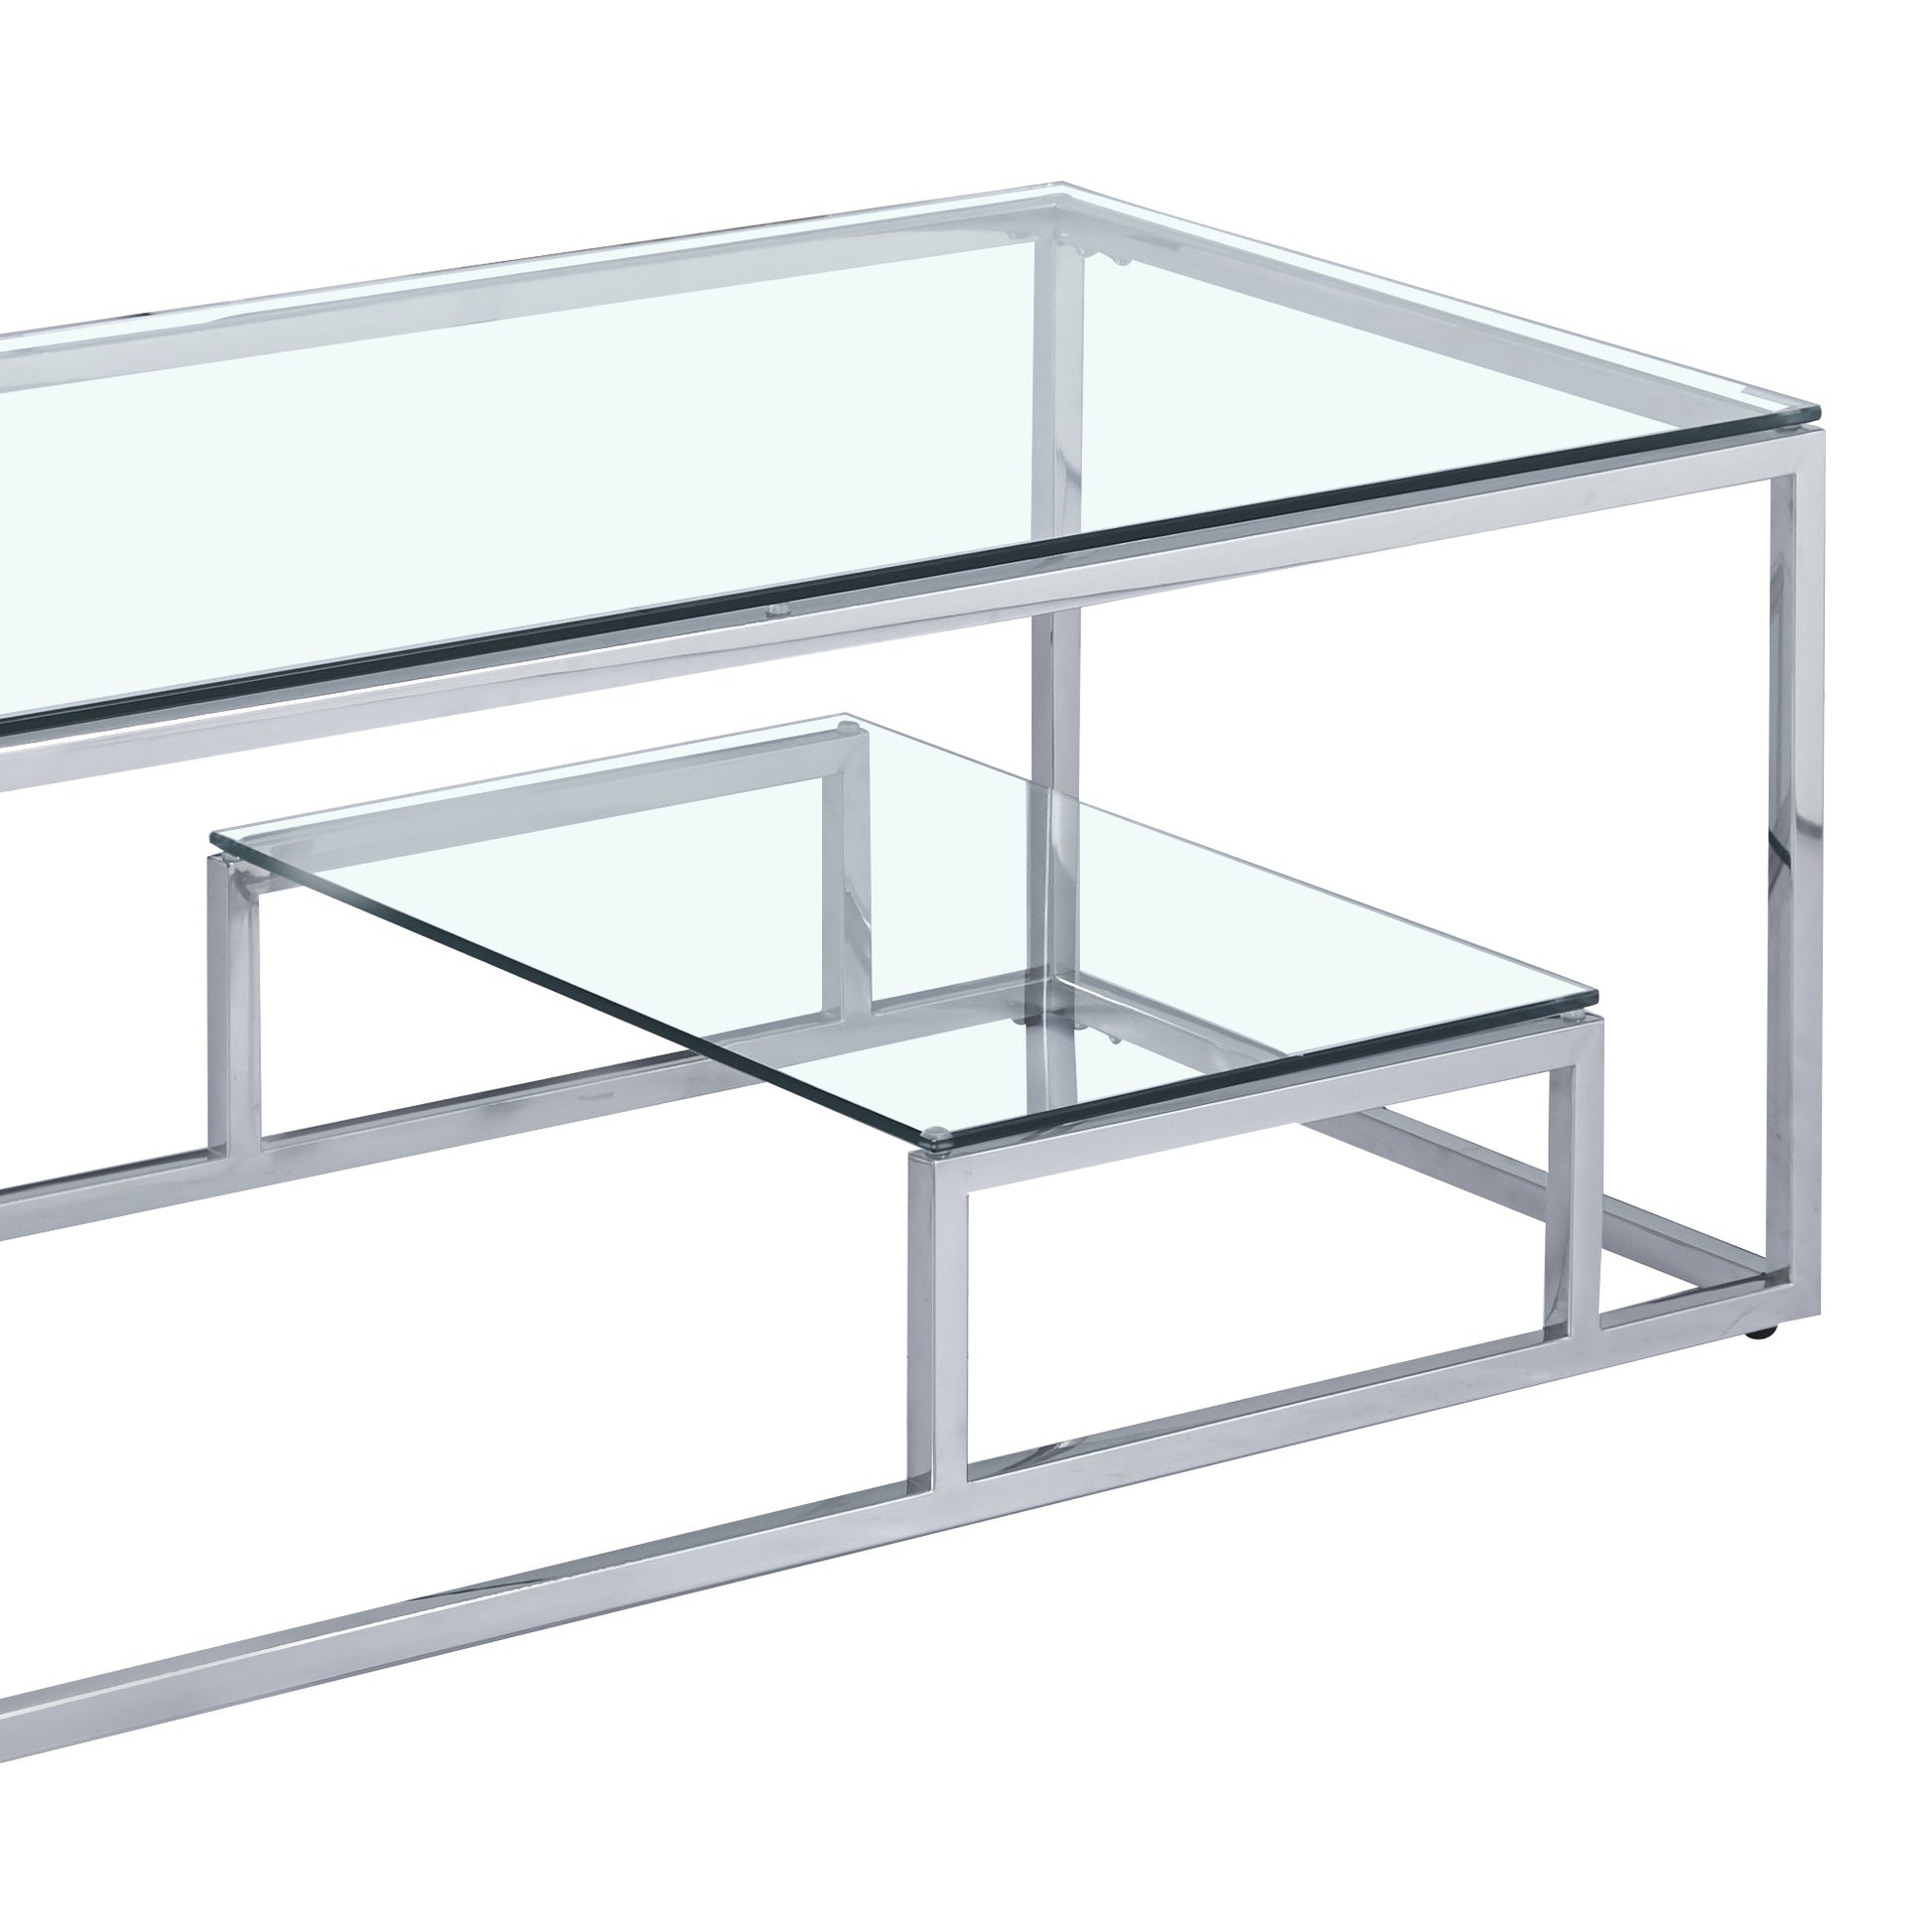 Enzo Minimalist Glass Coffee Table With Silver Legs